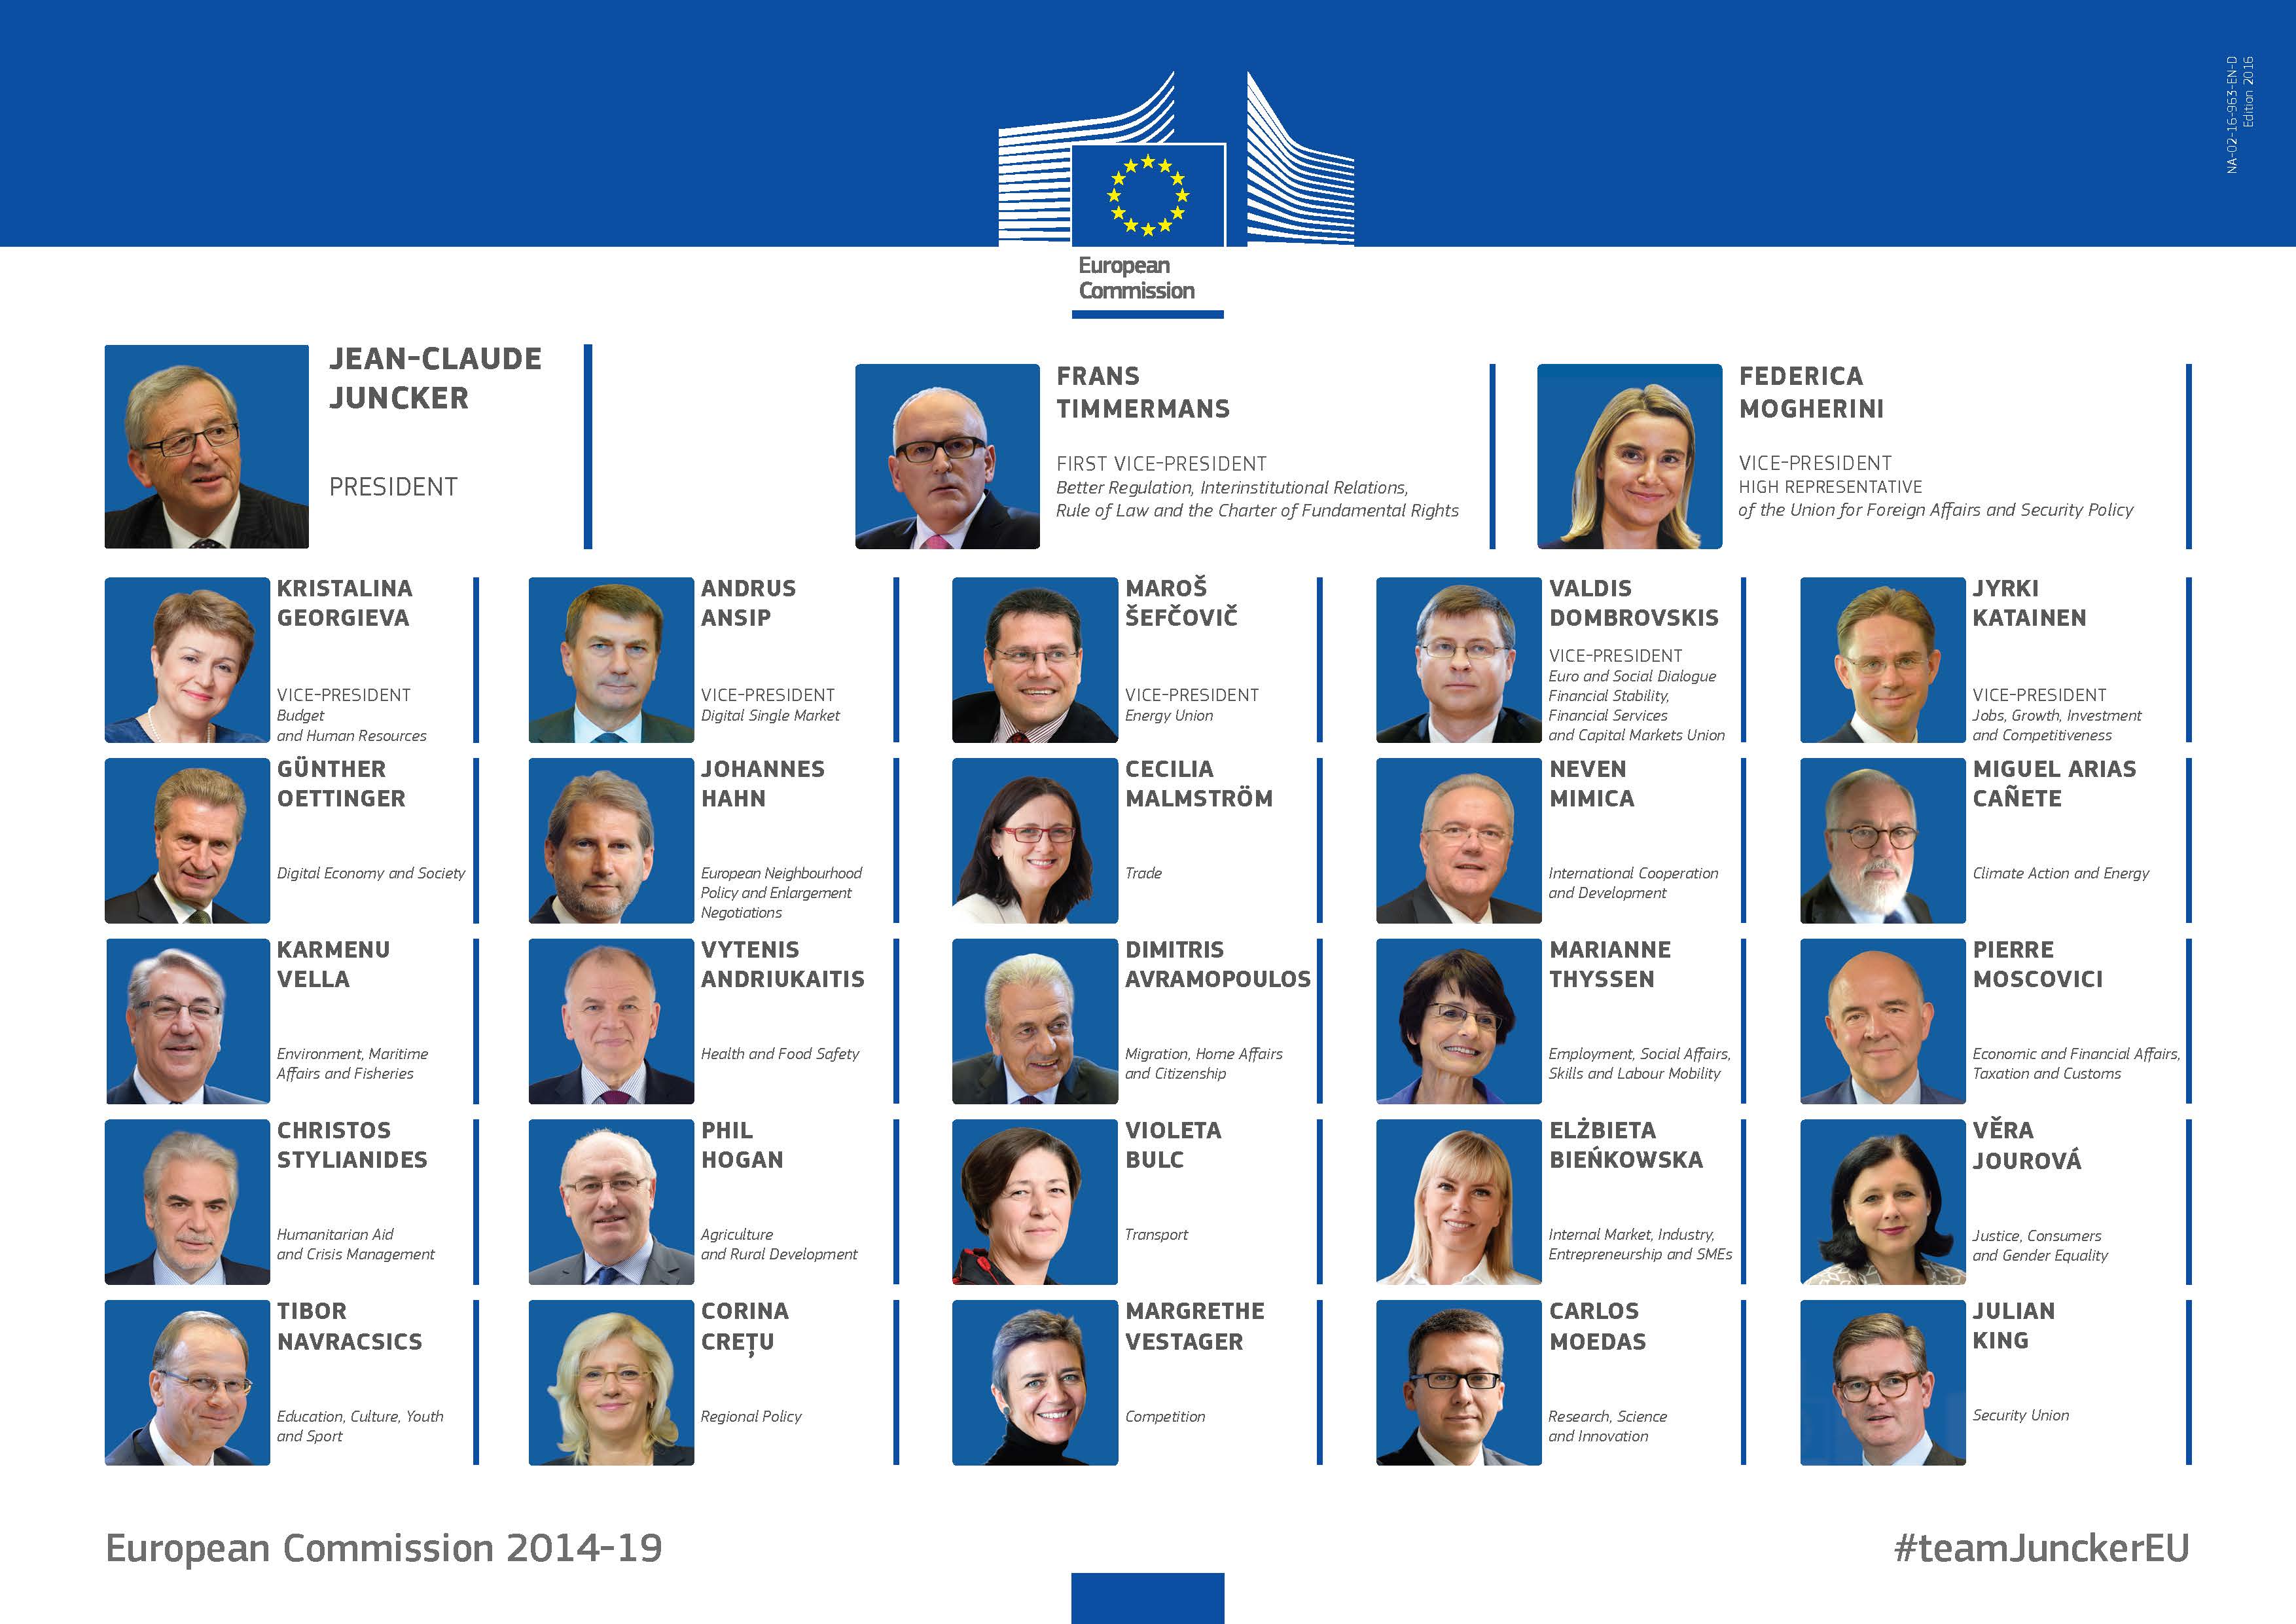 Mini-poster: Members of the European Commission 2014-2019 – updated